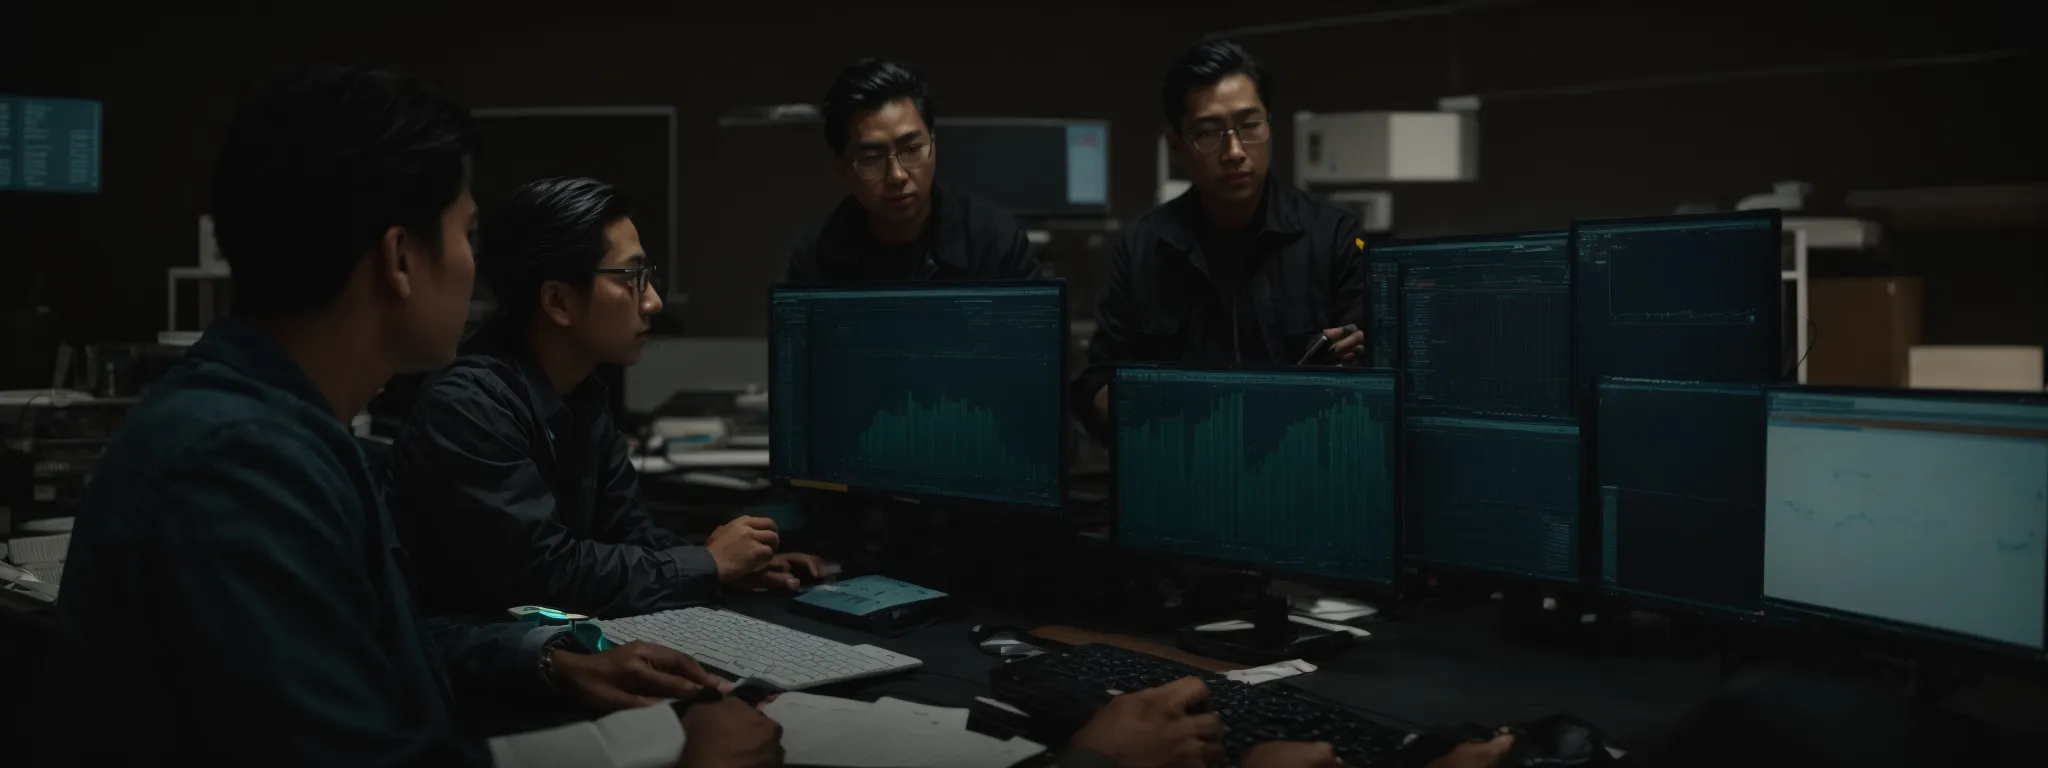 a group of professionals gathered around a computer screen, discussing charts and strategies.